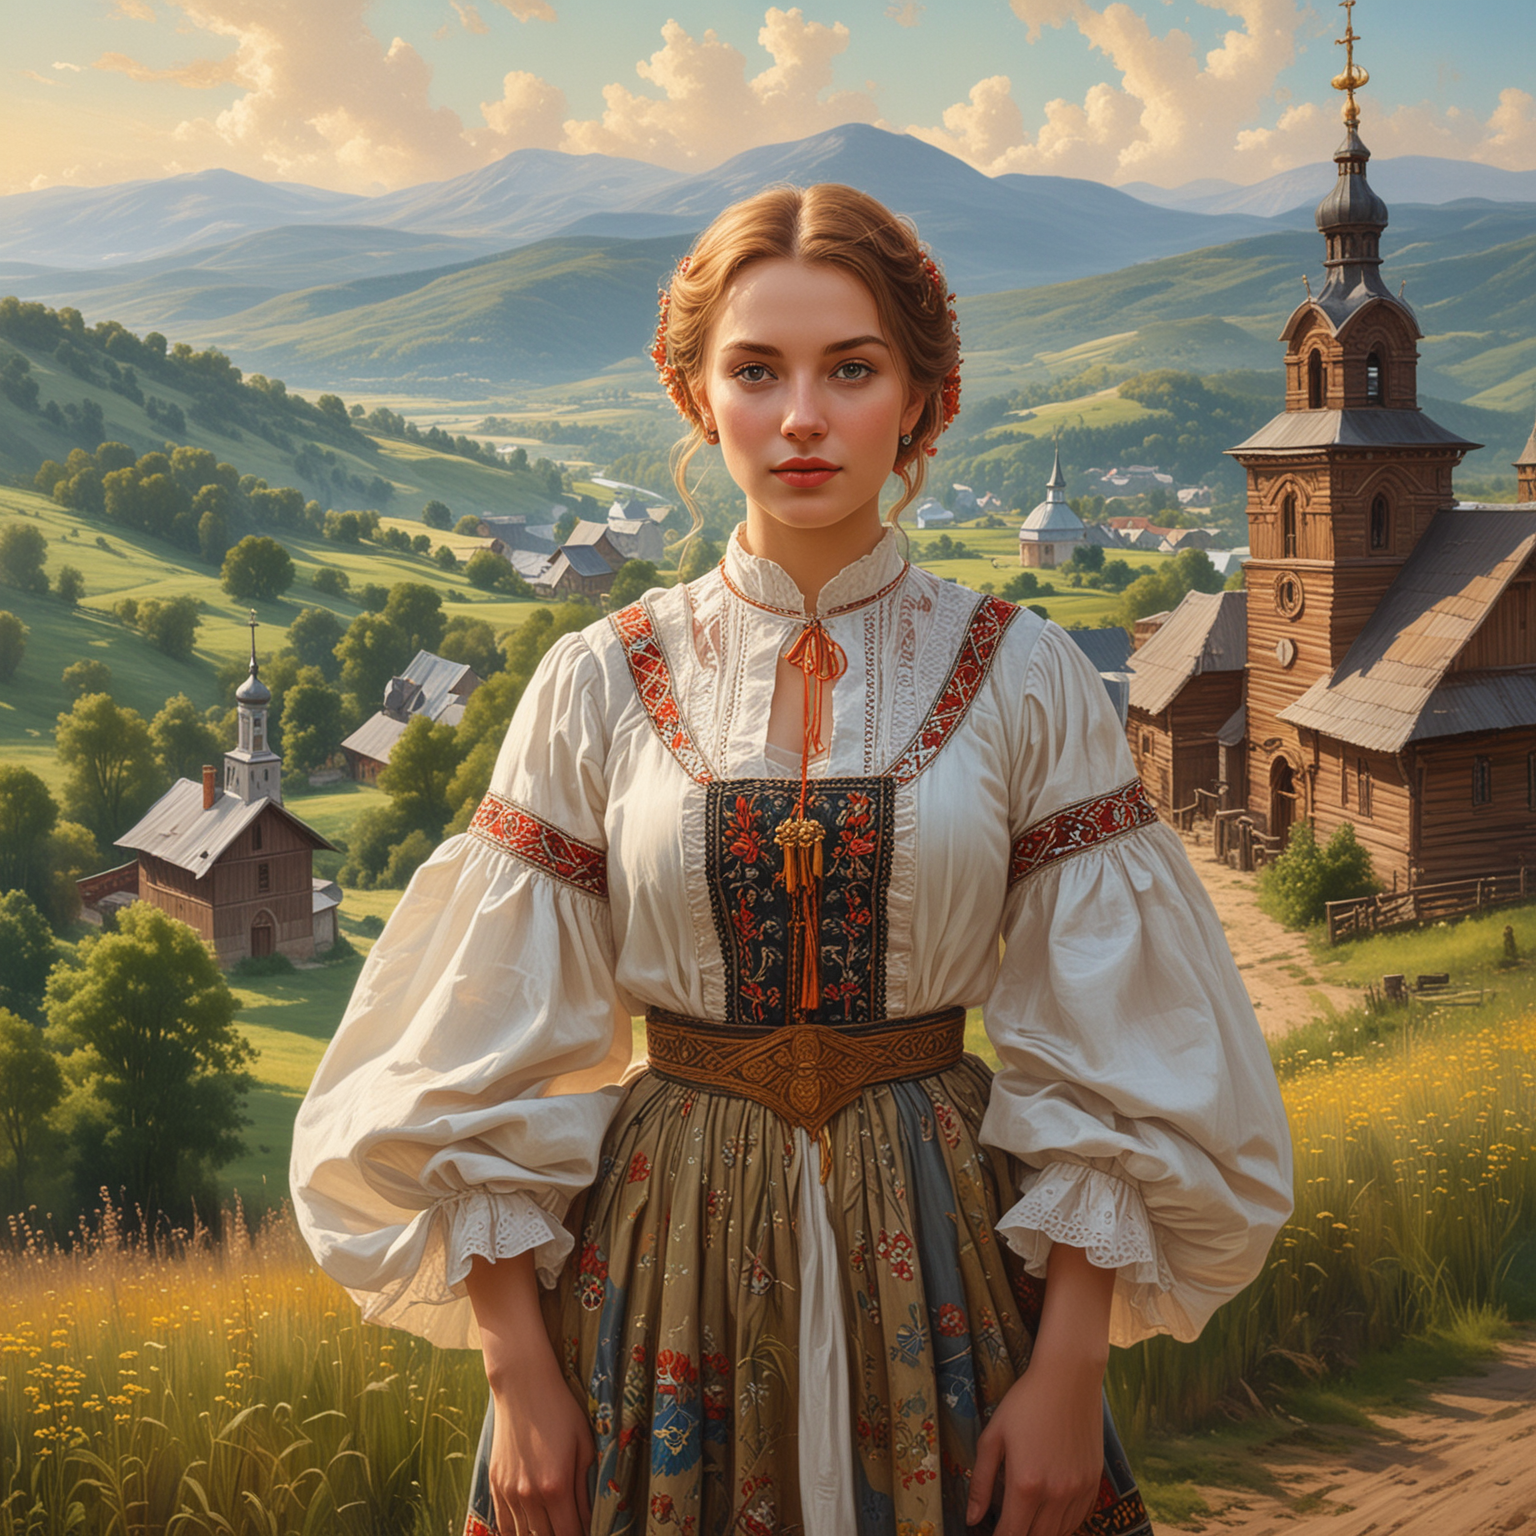 Enchanting Ukrainian Woman in Traditional Attire with Bieszczady Mountains Background